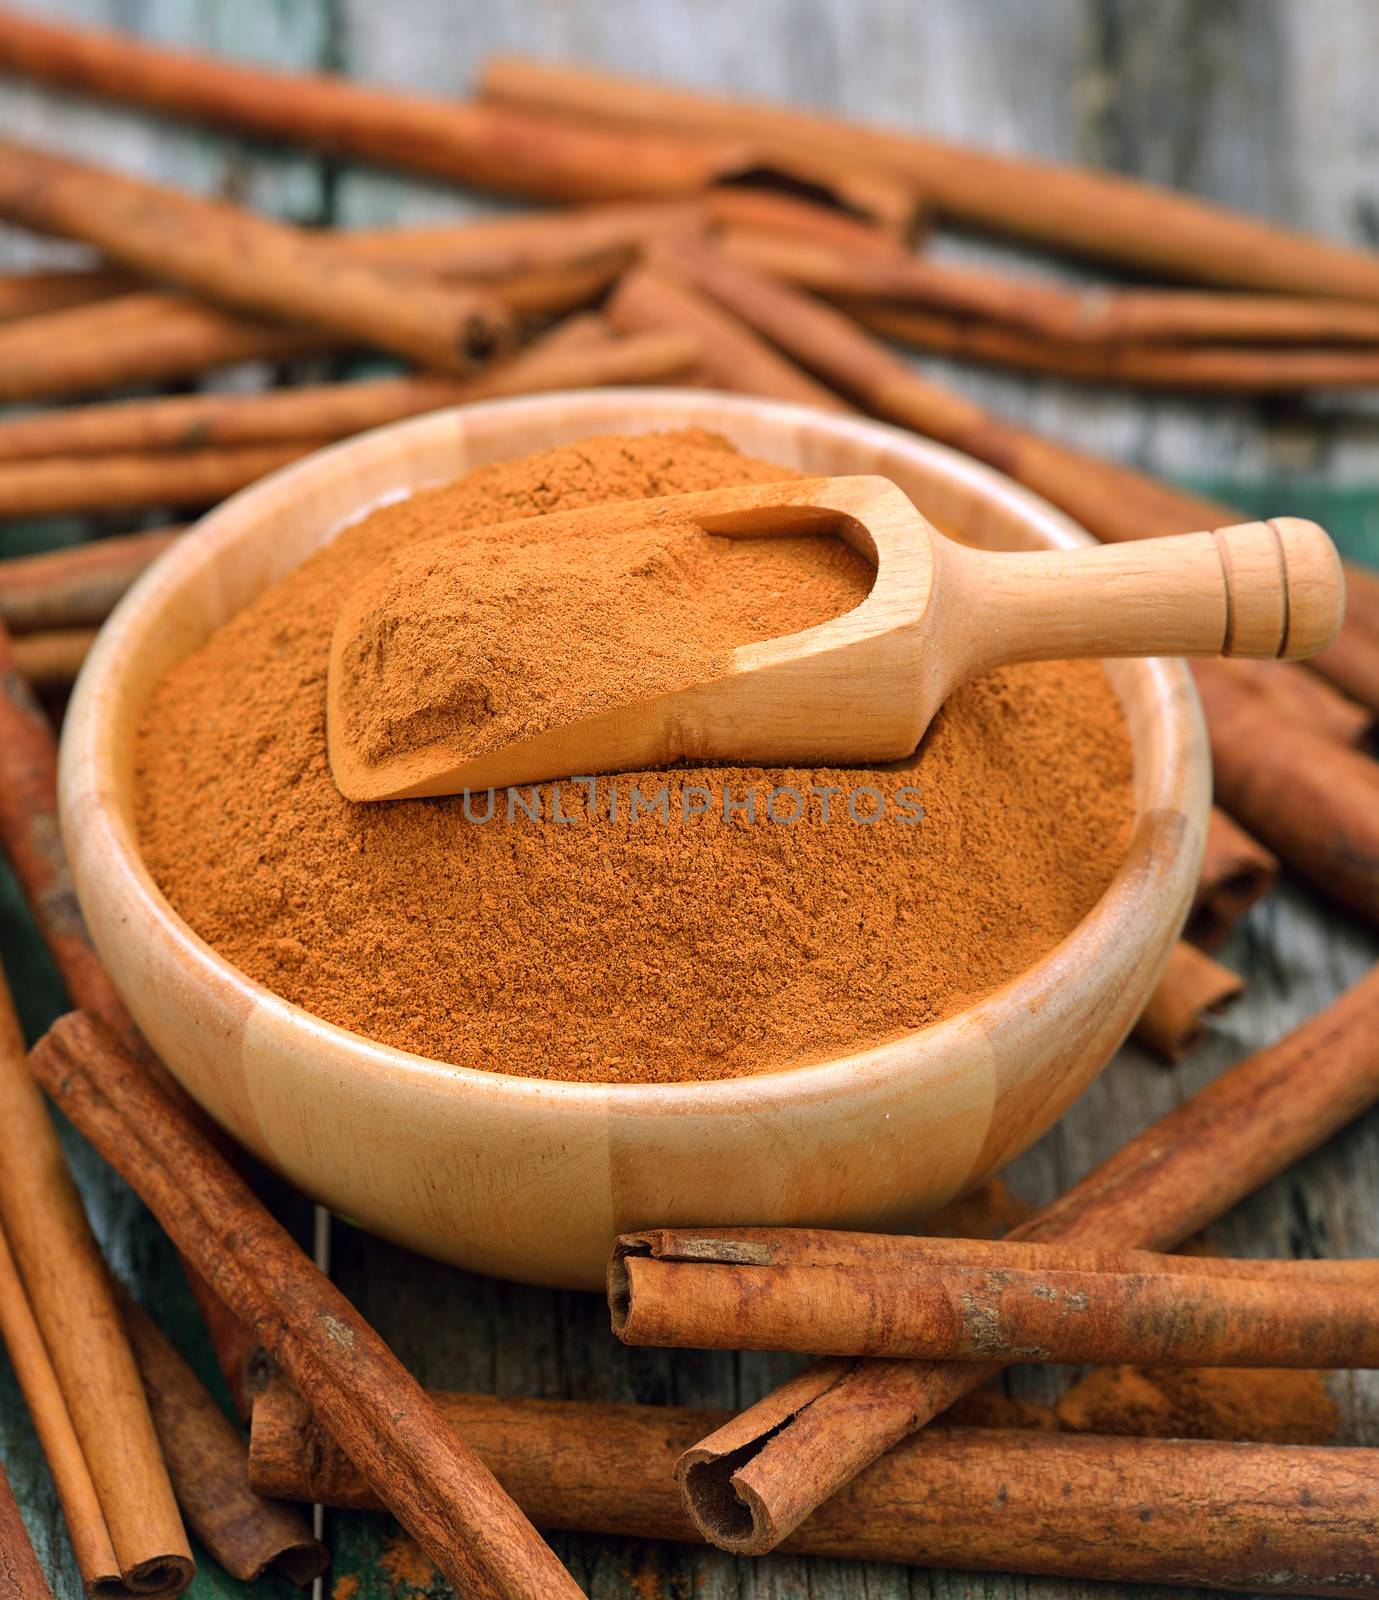 Cinnamon sticks and powder cinnamon in the bowl on table by sommai